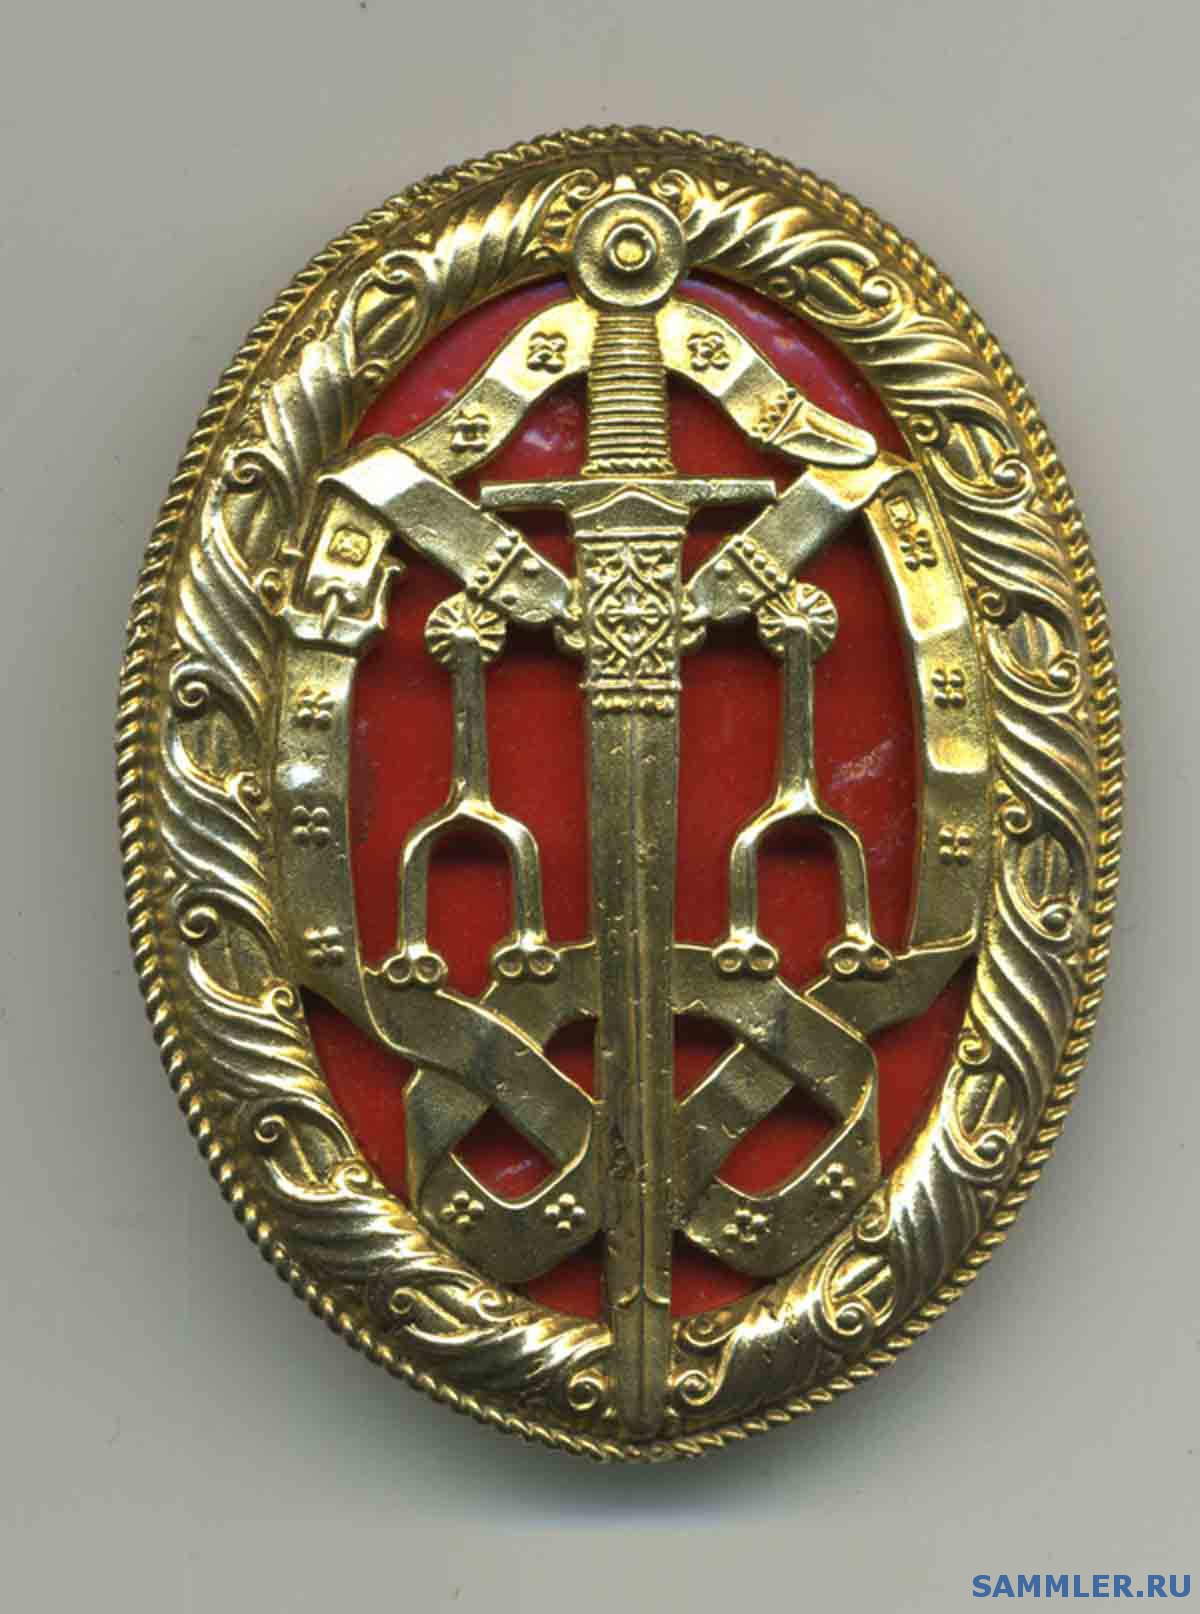 The_Knight_Bachelor__s_badge_2nd_type_.jpg